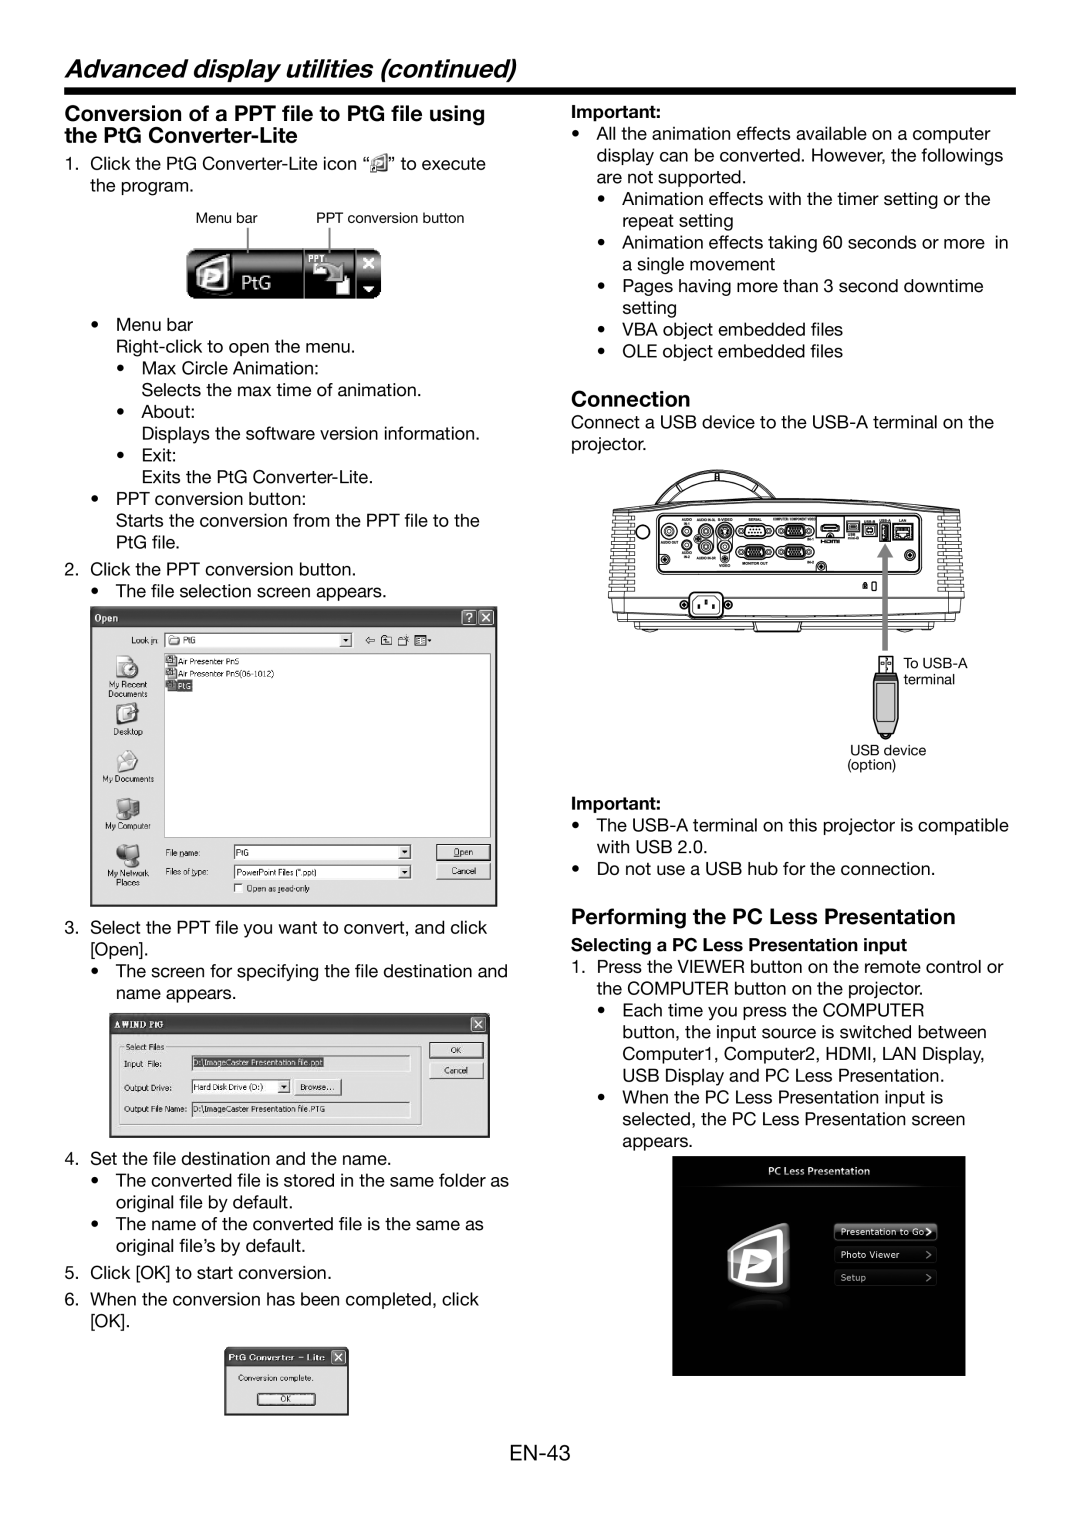 Mitsubishi Electronics WD385U-EST user manual Conversion of a PPT file to PtG file using the PtG Converter-Lite, Connection 